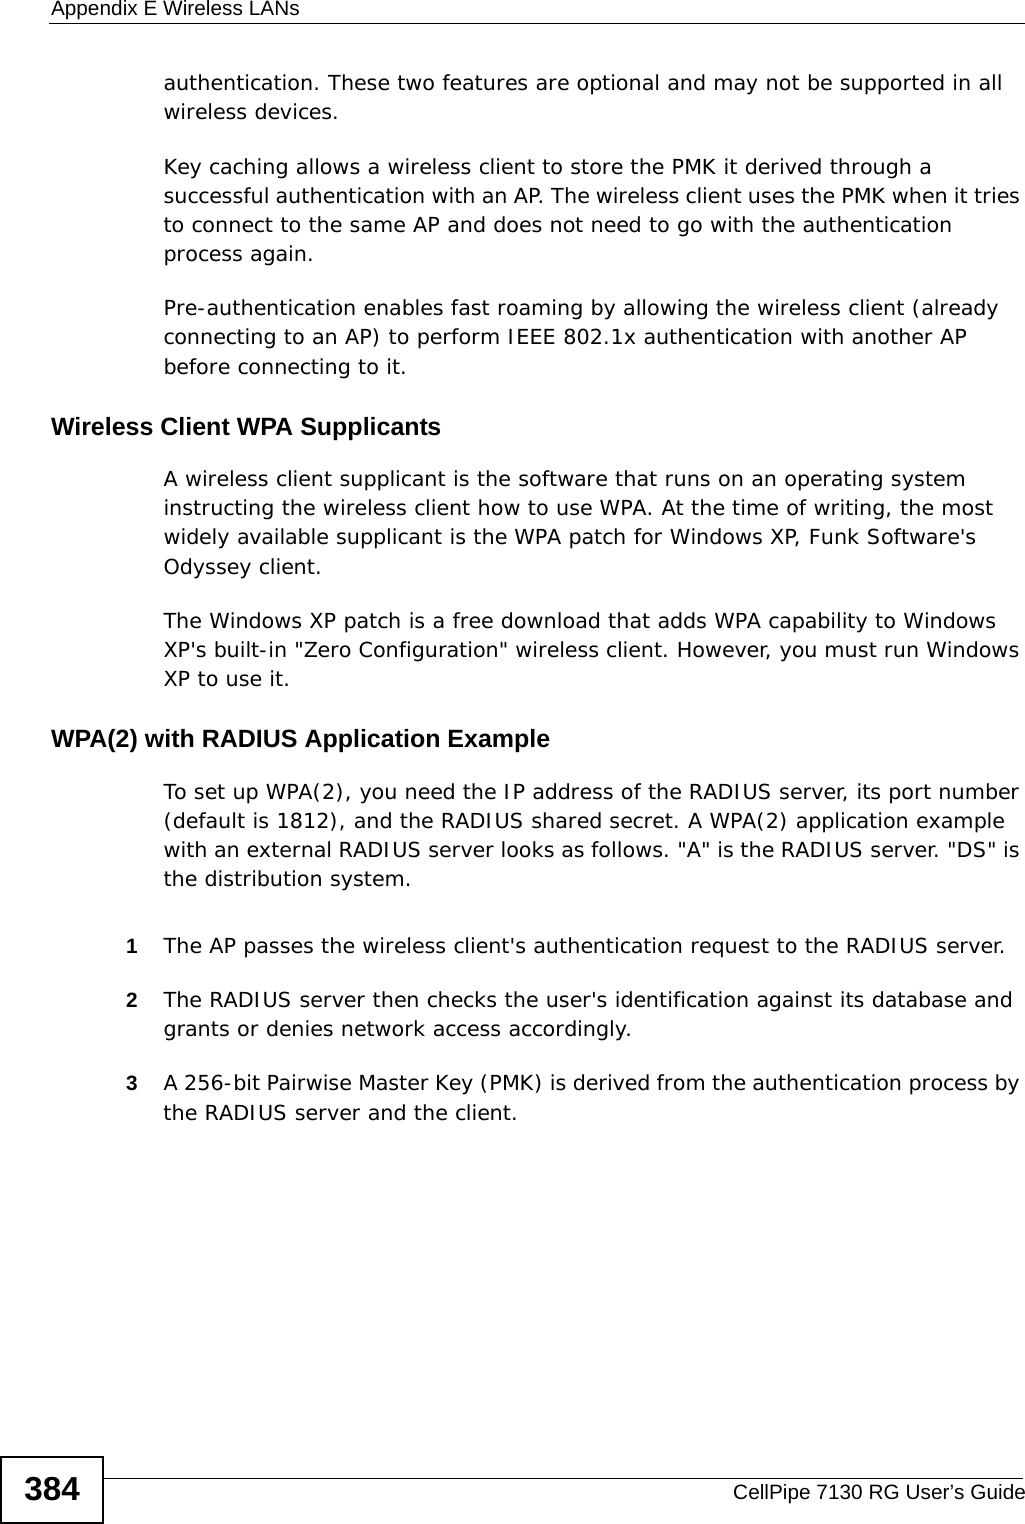 Appendix E Wireless LANsCellPipe 7130 RG User’s Guide384authentication. These two features are optional and may not be supported in all wireless devices.Key caching allows a wireless client to store the PMK it derived through a successful authentication with an AP. The wireless client uses the PMK when it tries to connect to the same AP and does not need to go with the authentication process again.Pre-authentication enables fast roaming by allowing the wireless client (already connecting to an AP) to perform IEEE 802.1x authentication with another AP before connecting to it.Wireless Client WPA SupplicantsA wireless client supplicant is the software that runs on an operating system instructing the wireless client how to use WPA. At the time of writing, the most widely available supplicant is the WPA patch for Windows XP, Funk Software&apos;s Odyssey client. The Windows XP patch is a free download that adds WPA capability to Windows XP&apos;s built-in &quot;Zero Configuration&quot; wireless client. However, you must run Windows XP to use it. WPA(2) with RADIUS Application ExampleTo set up WPA(2), you need the IP address of the RADIUS server, its port number (default is 1812), and the RADIUS shared secret. A WPA(2) application example with an external RADIUS server looks as follows. &quot;A&quot; is the RADIUS server. &quot;DS&quot; is the distribution system.1The AP passes the wireless client&apos;s authentication request to the RADIUS server.2The RADIUS server then checks the user&apos;s identification against its database and grants or denies network access accordingly.3A 256-bit Pairwise Master Key (PMK) is derived from the authentication process by the RADIUS server and the client.